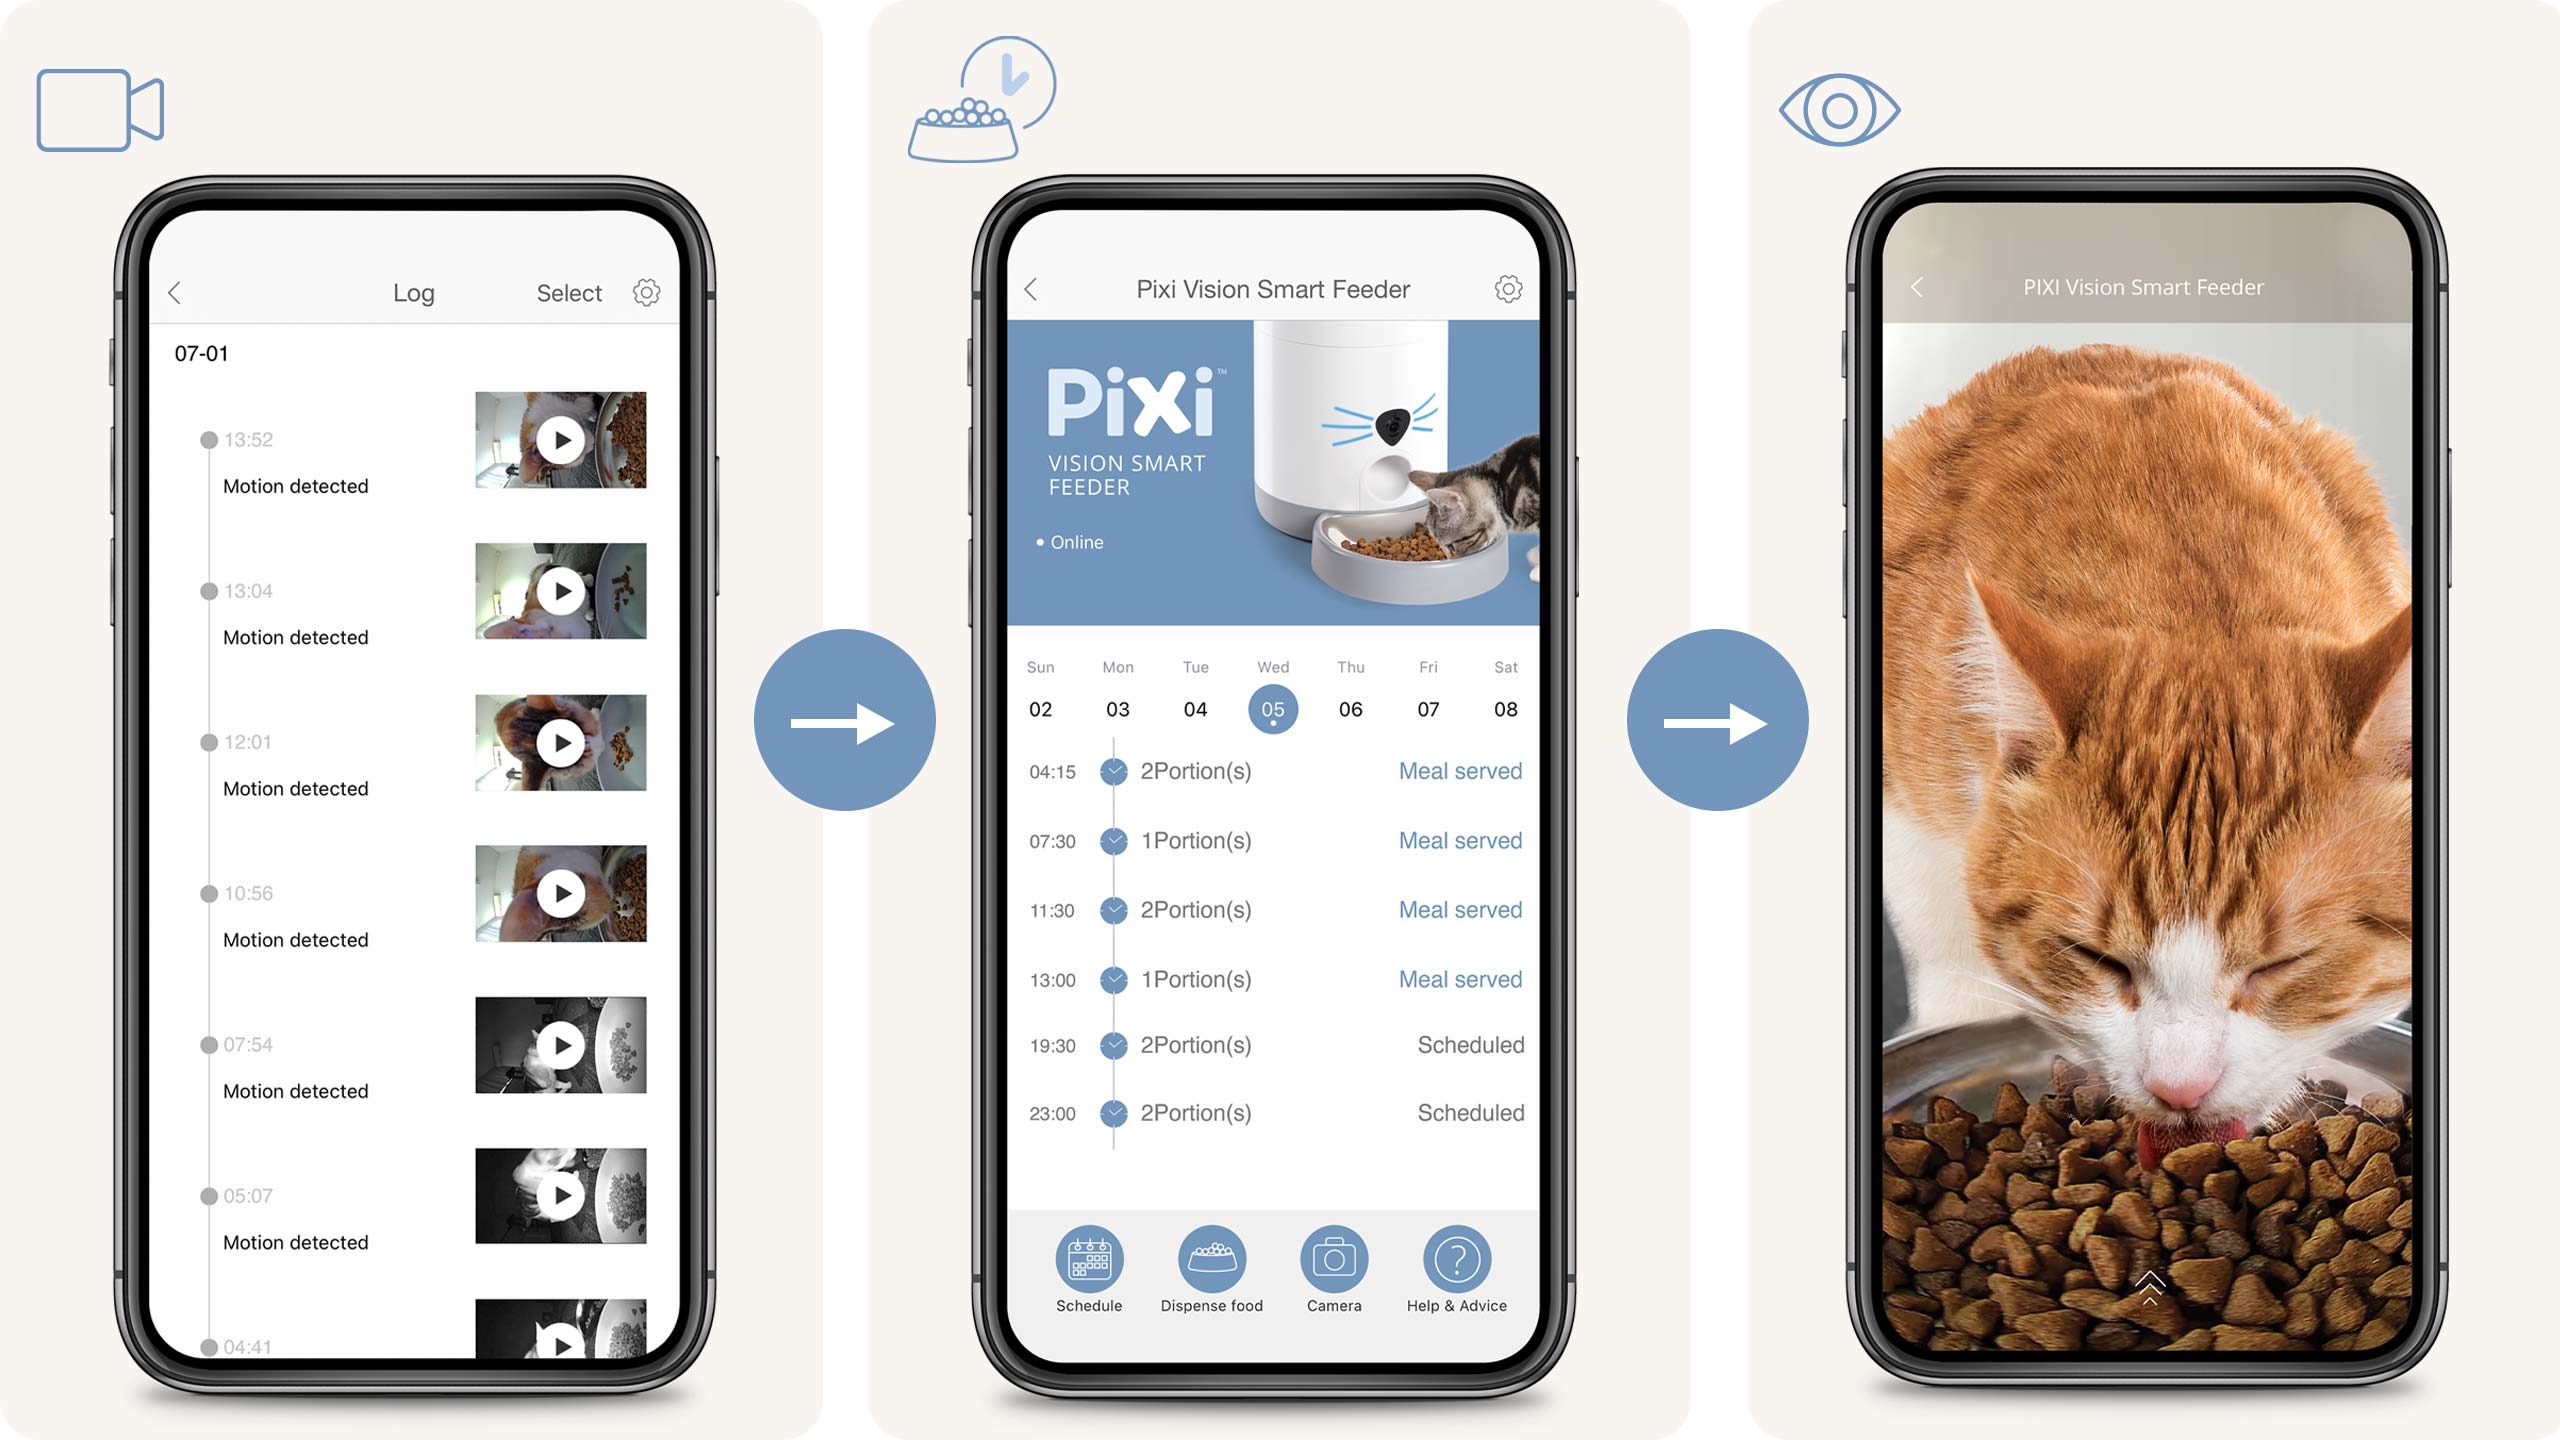 Watch highlights of your cat's behavior in the app